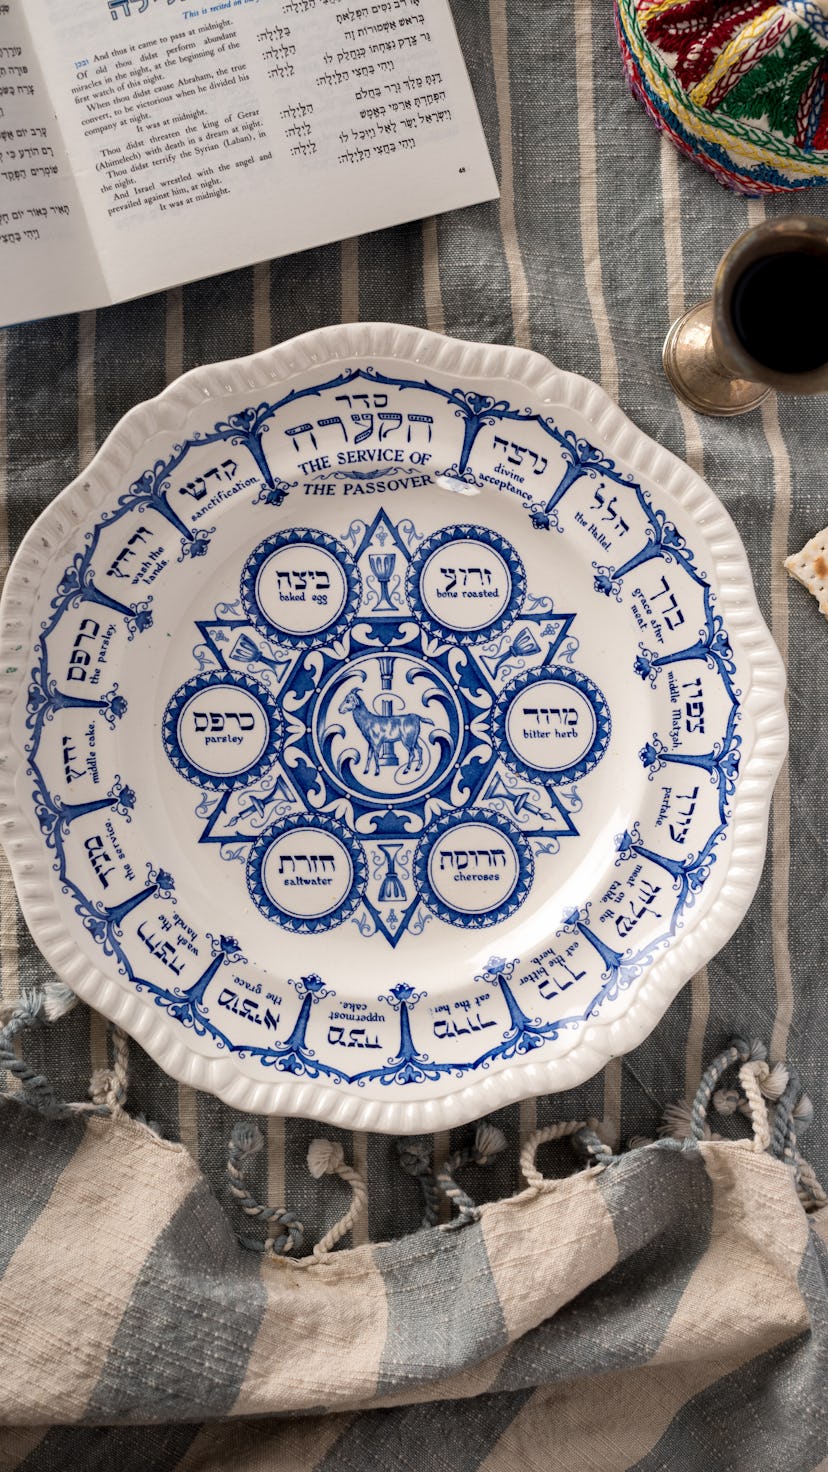 Seder plates can range from traditional to modern.